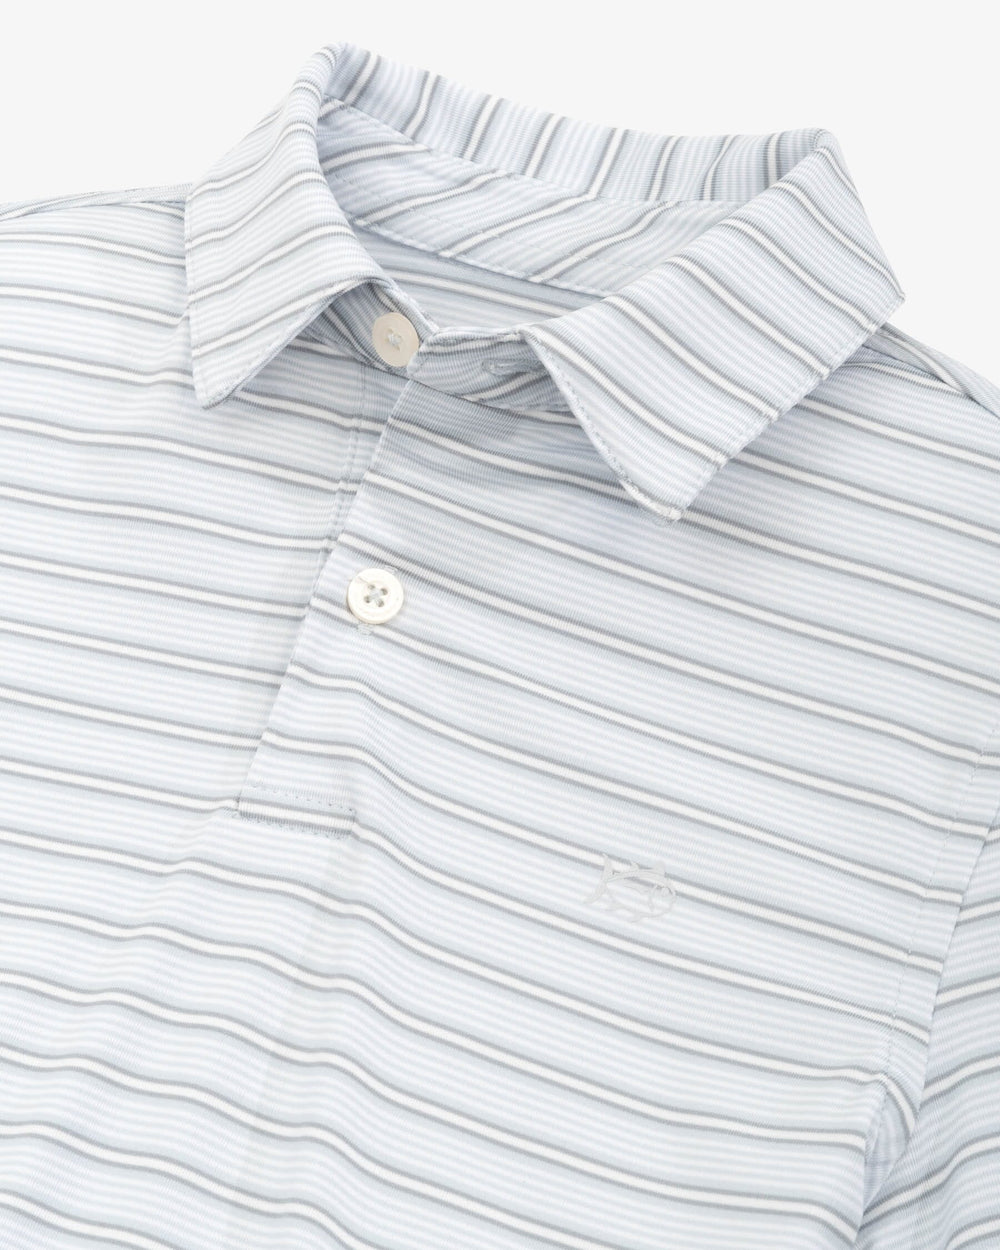 The detail view of the Southern Tide Boys Driver Crawford Stripe Performance Polo Shirt by Southern Tide - Slate Grey